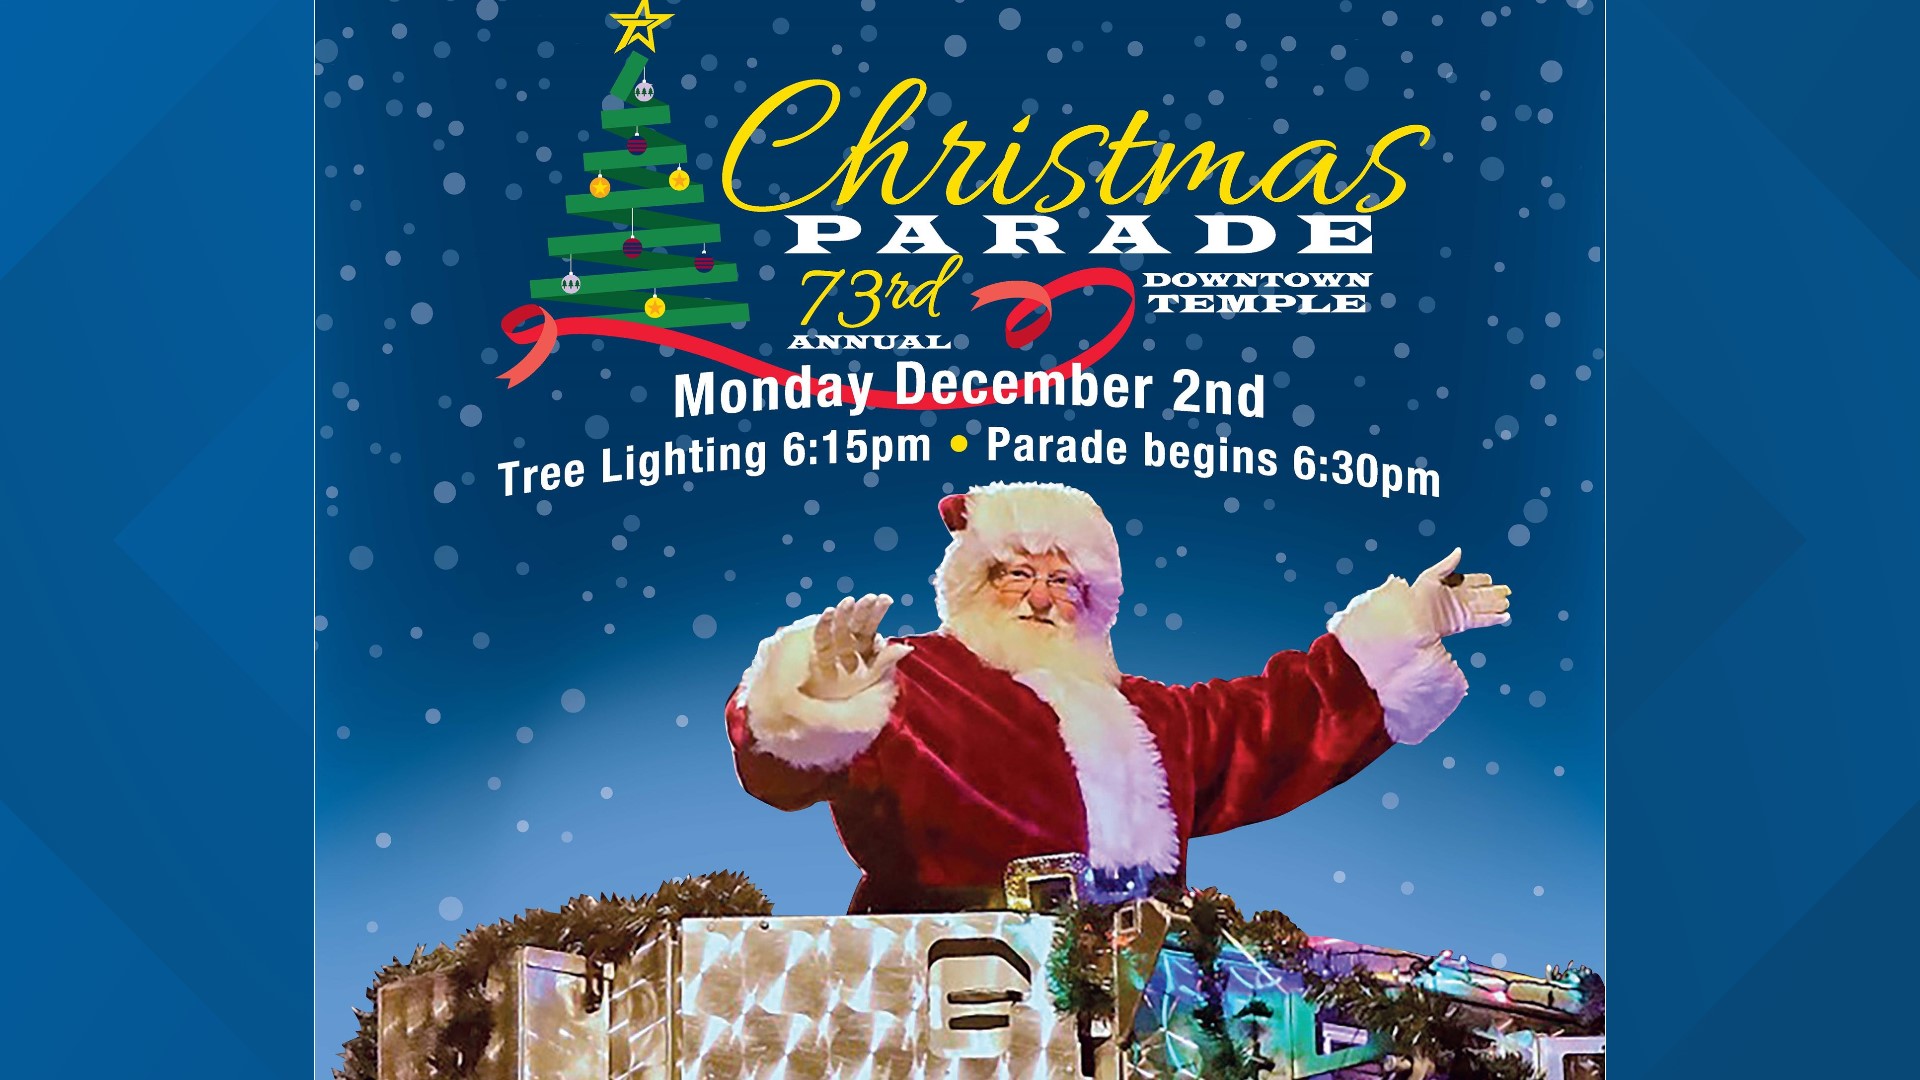 The parade theme is “12 Days of Christmas” with activities beginning at 4 p.m.